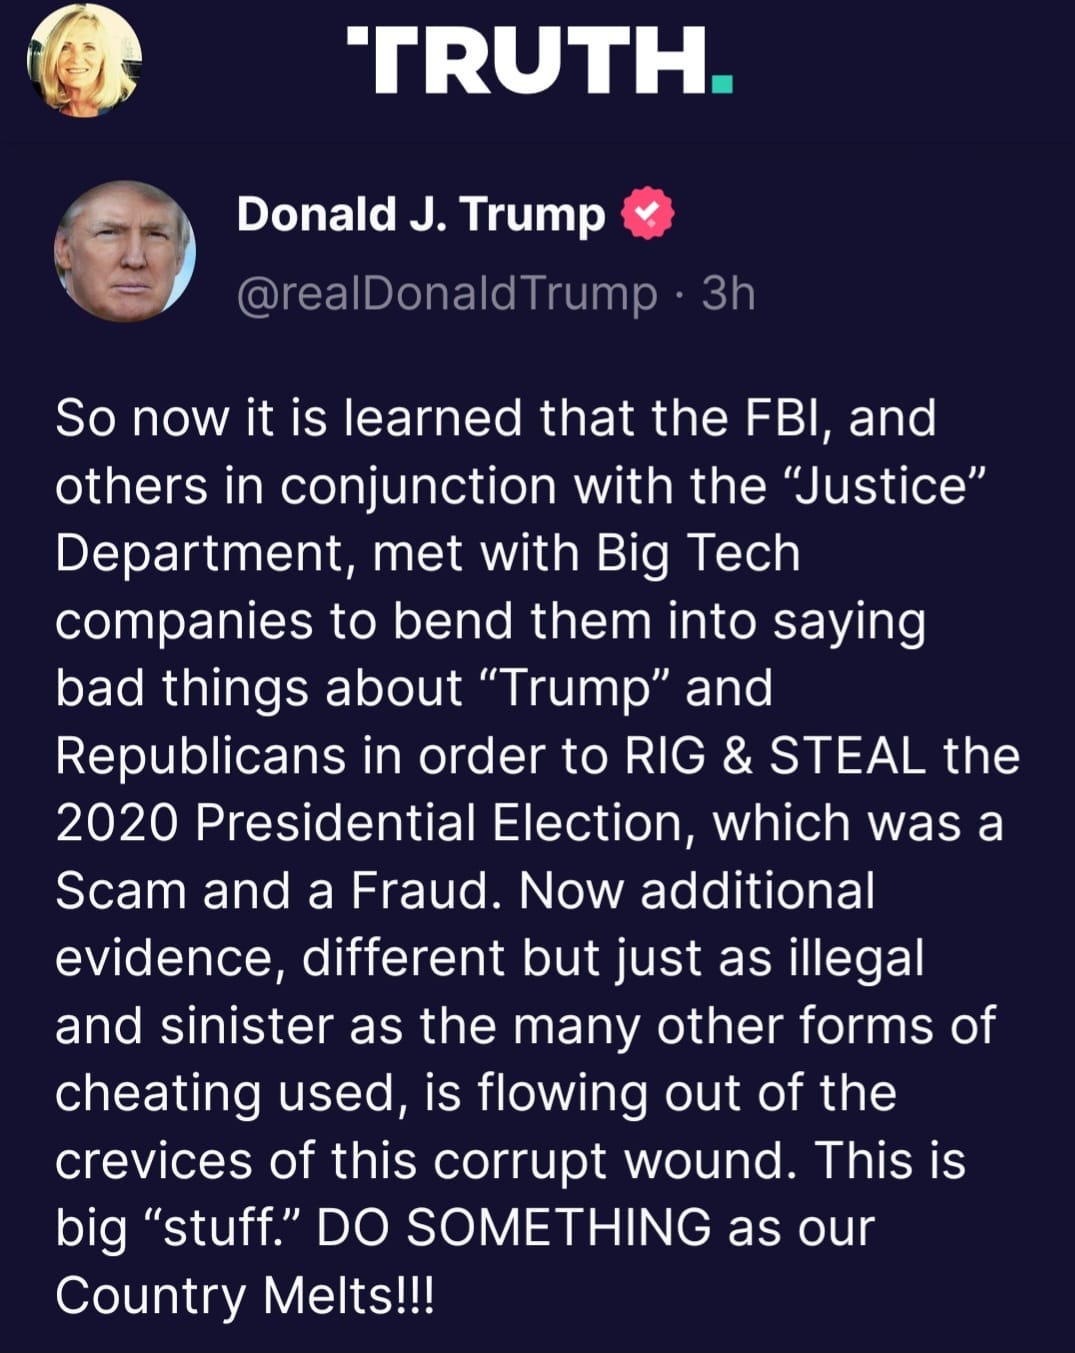 May be a Twitter screenshot of 2 people and text that says 'TRUTH. Donald J. Trump @realDonaldTrump 3h So now it is learned that the FBI, and others in conjunction with the "Justice" Department, met with Big Tech companies to bend them into saying bad things about "Trump" and Republicans in order to RIG & STEAL the 2020 Presidential Election, which was a Scam and a Fraud. Now additional evidence, different but just as illegal and sinister as the many other forms of cheating used, is flowing out of the crevices of this corrupt wound. This is big "stuff." DO SOMETHING as our Country Melts!!!'